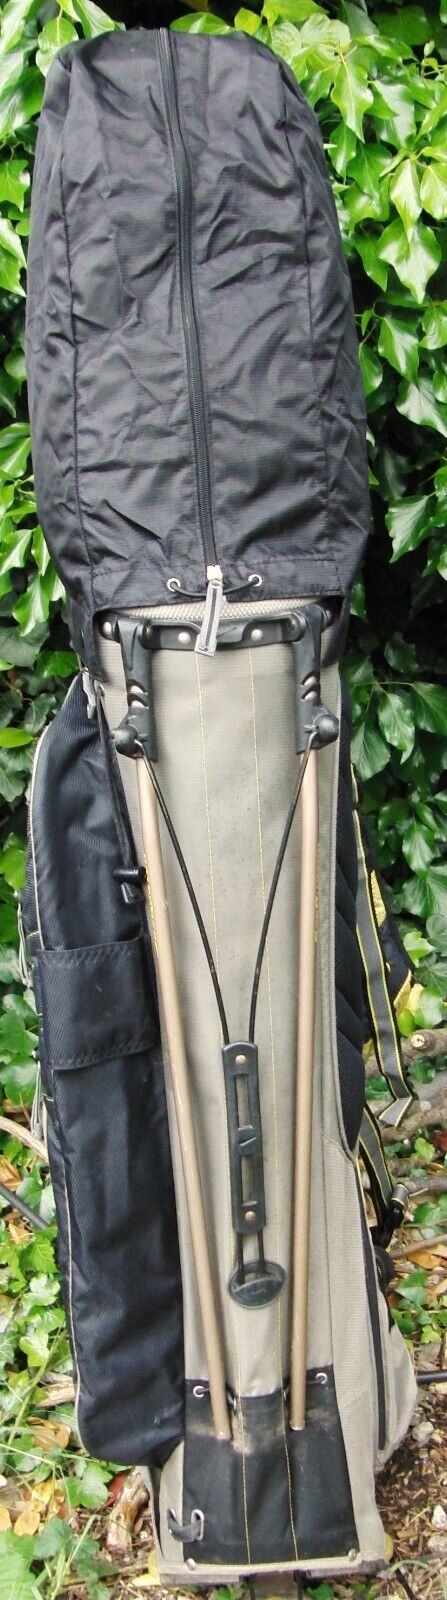 14 Division Nike Sasquatch Black & Yellow Cart Carry Golf Clubs Stand Bag*